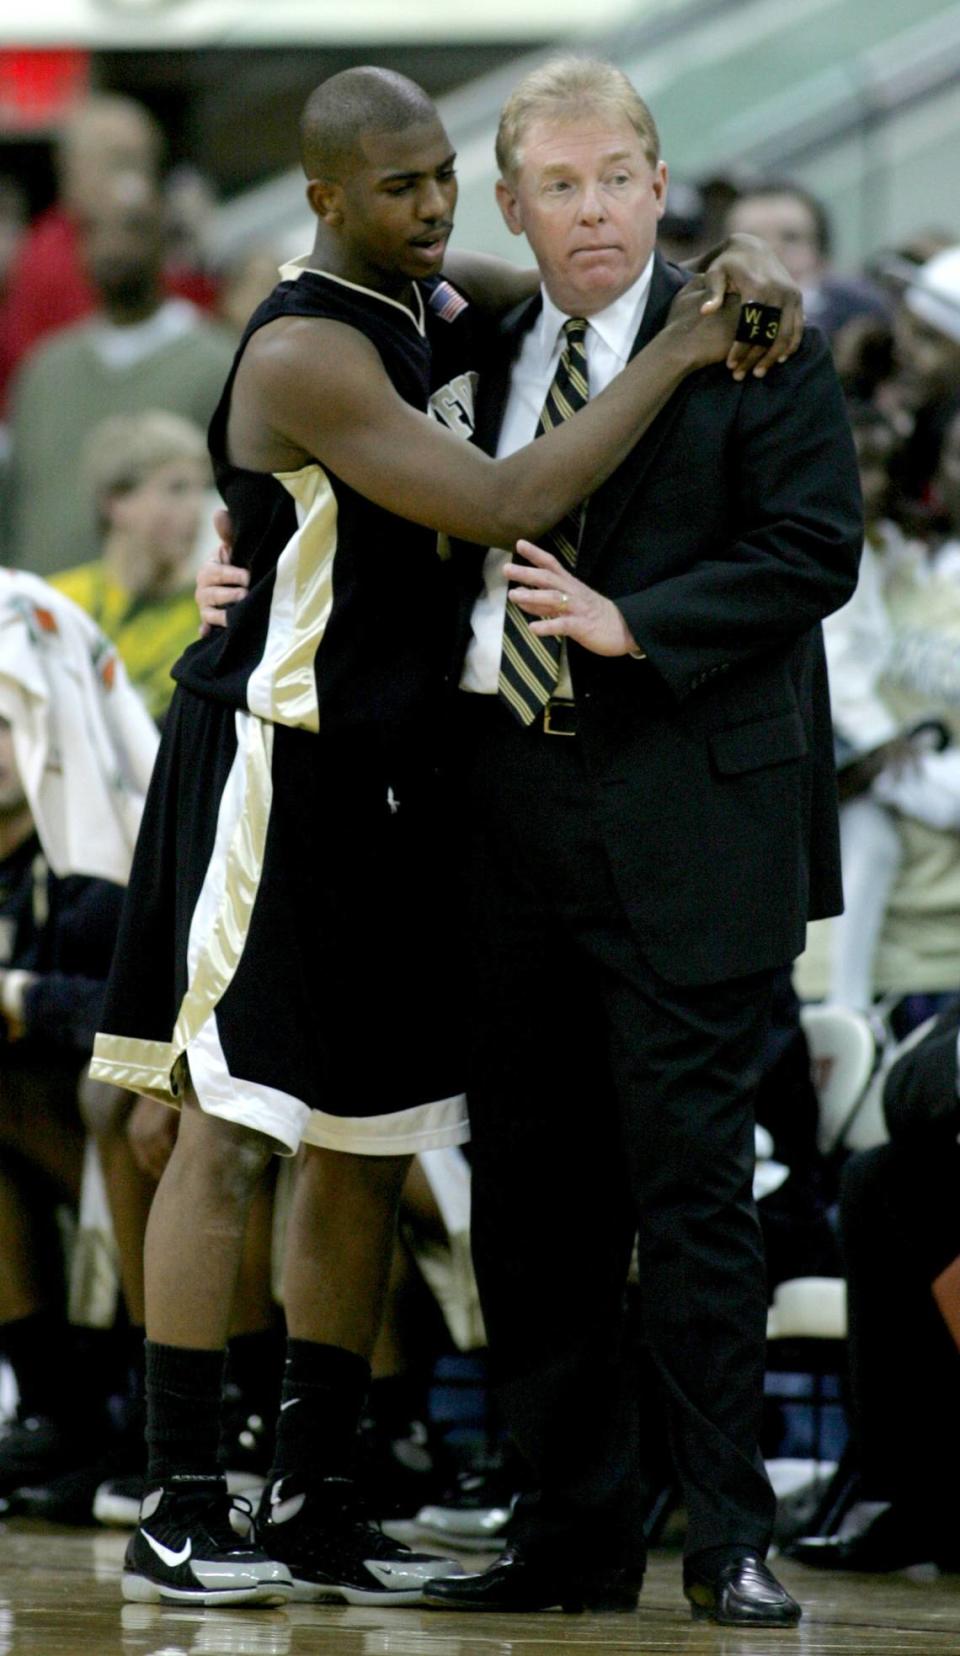 In 2005, Wake Forest point guard Chris Paul (left) embraced Wake’s head basketball coach, Skip Prosser. Prosser died suddenly in 2007, at age 56. Paul said Prosser’s motto of “Never delay gratitude” has stuck with him ever since.